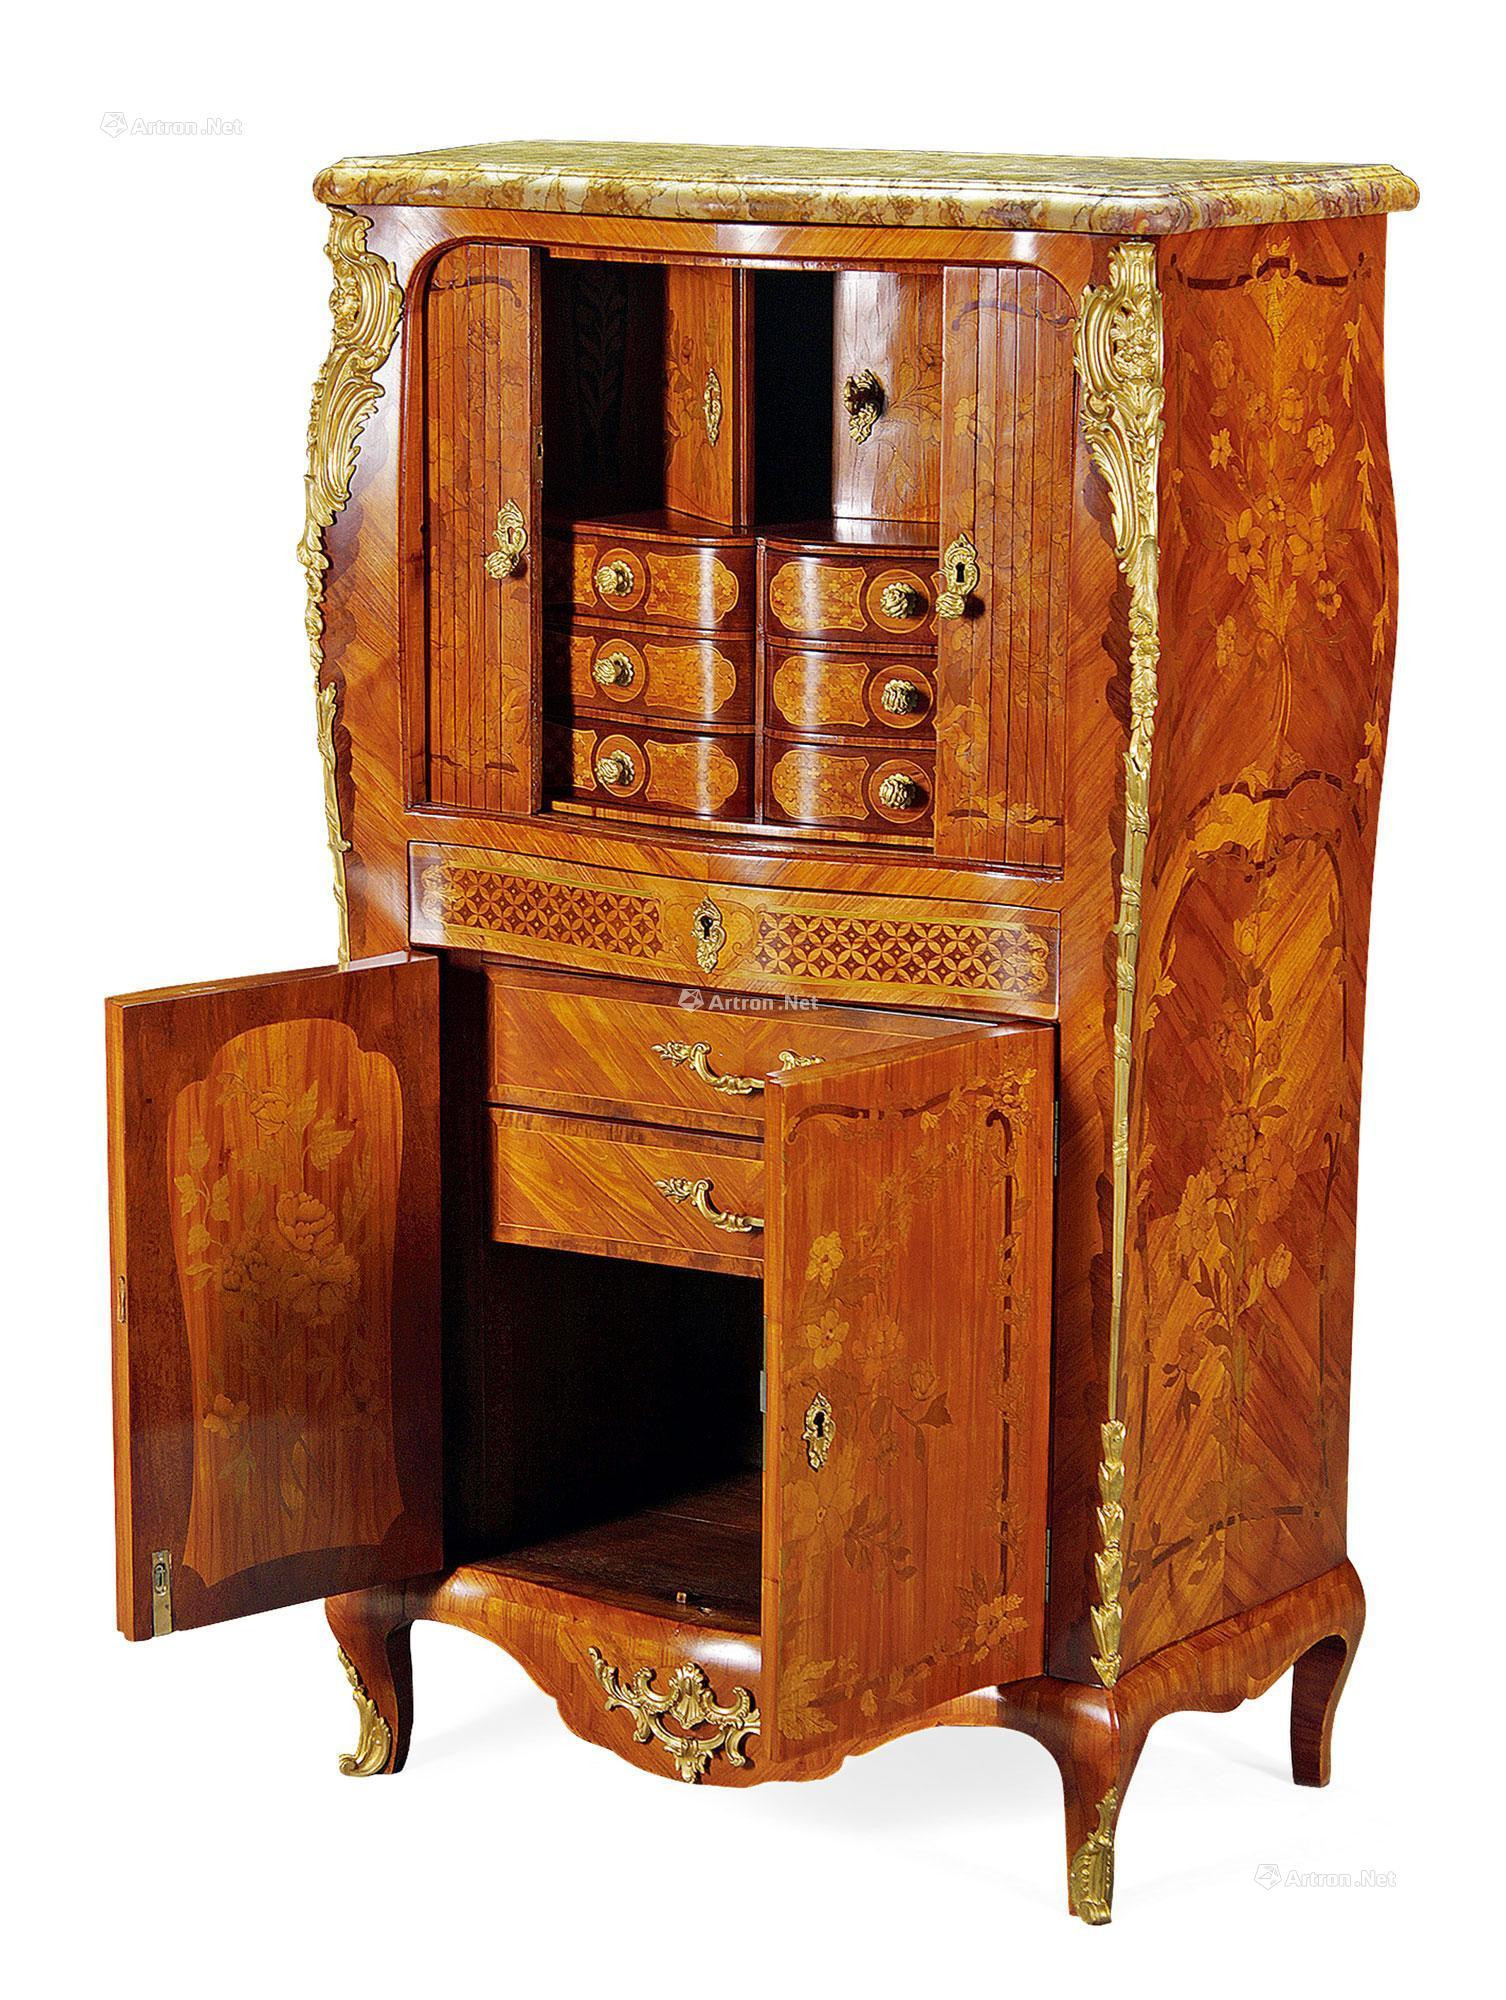 A LOUIS XV STYLE MARQUETRY LADY’S VANITY DESK